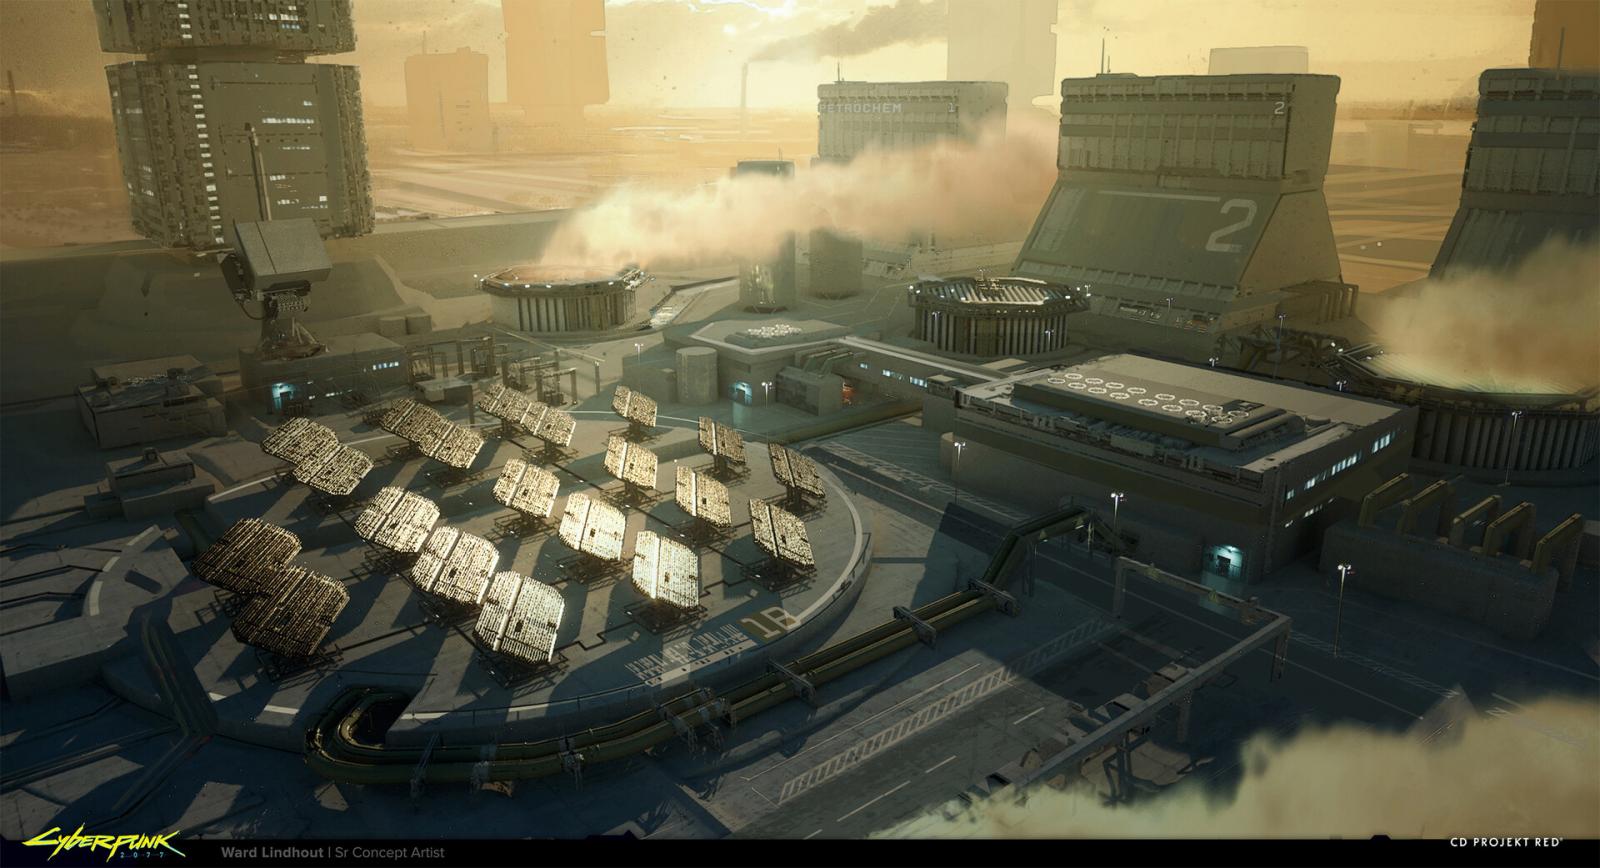 ward-lindhout-powerplant-old1-conceptart-cyberpunk2077-wardlindhout-small.jpg